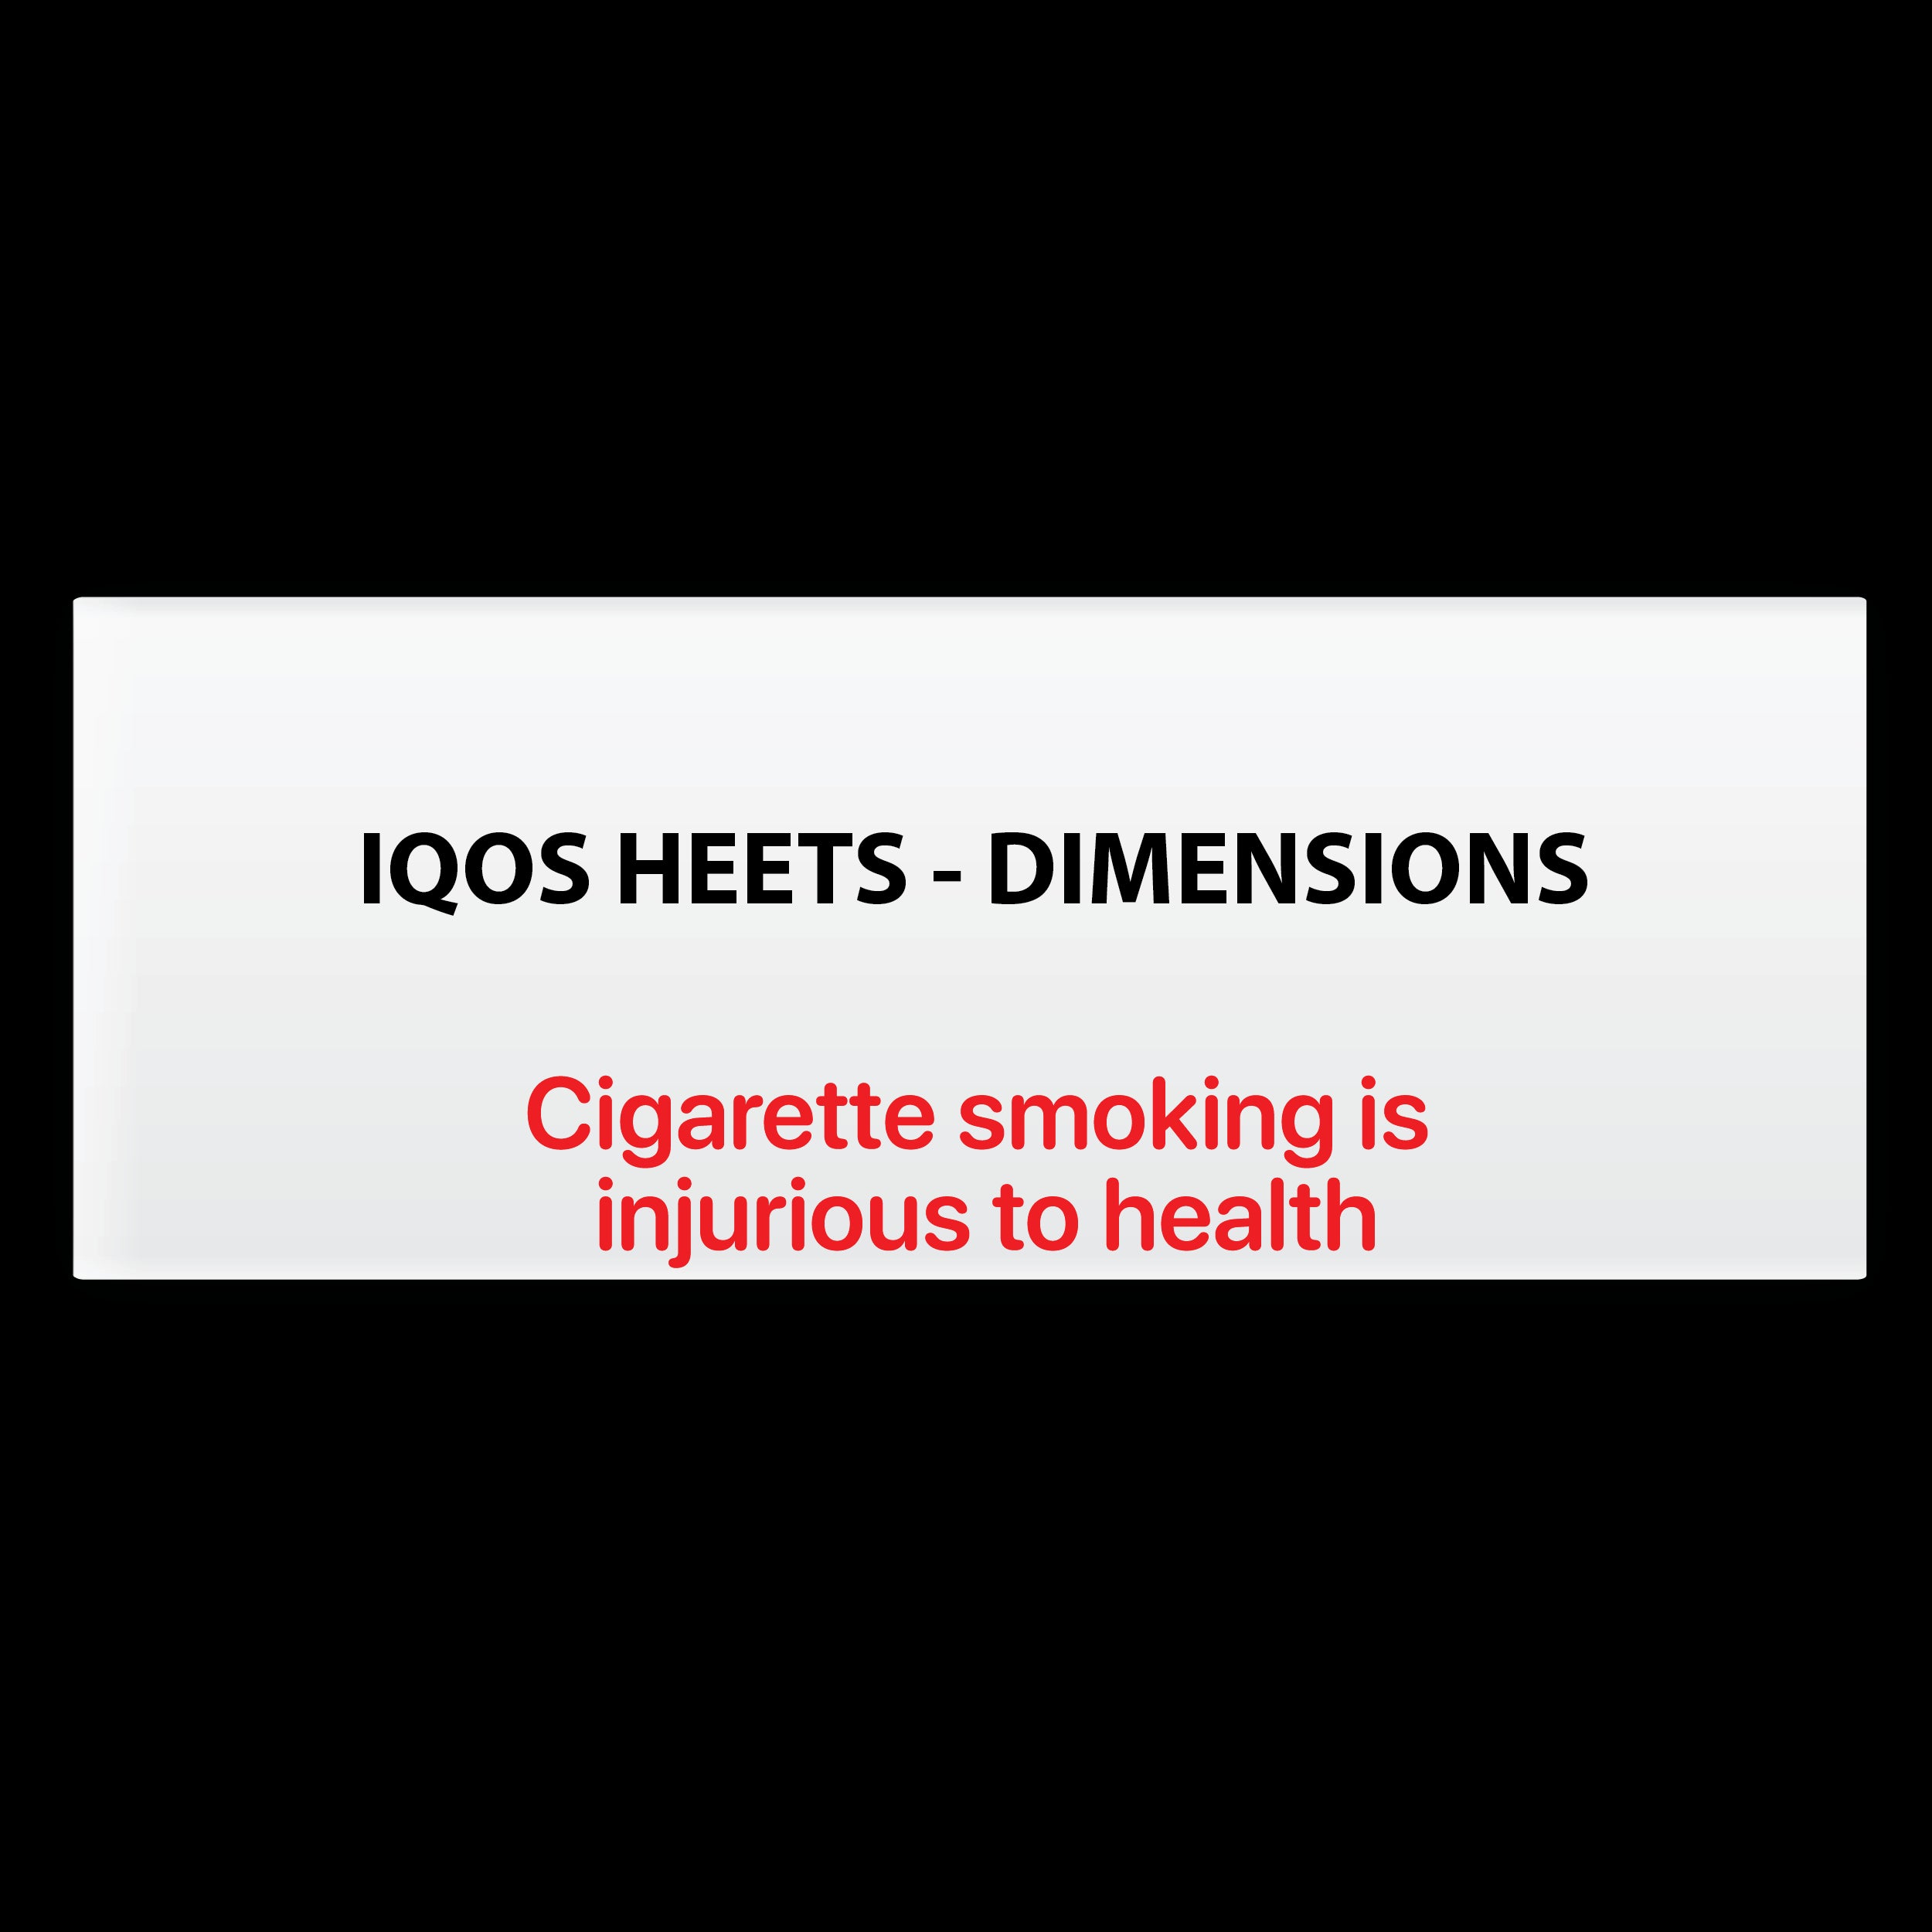 IQOS Heets - Dimensions